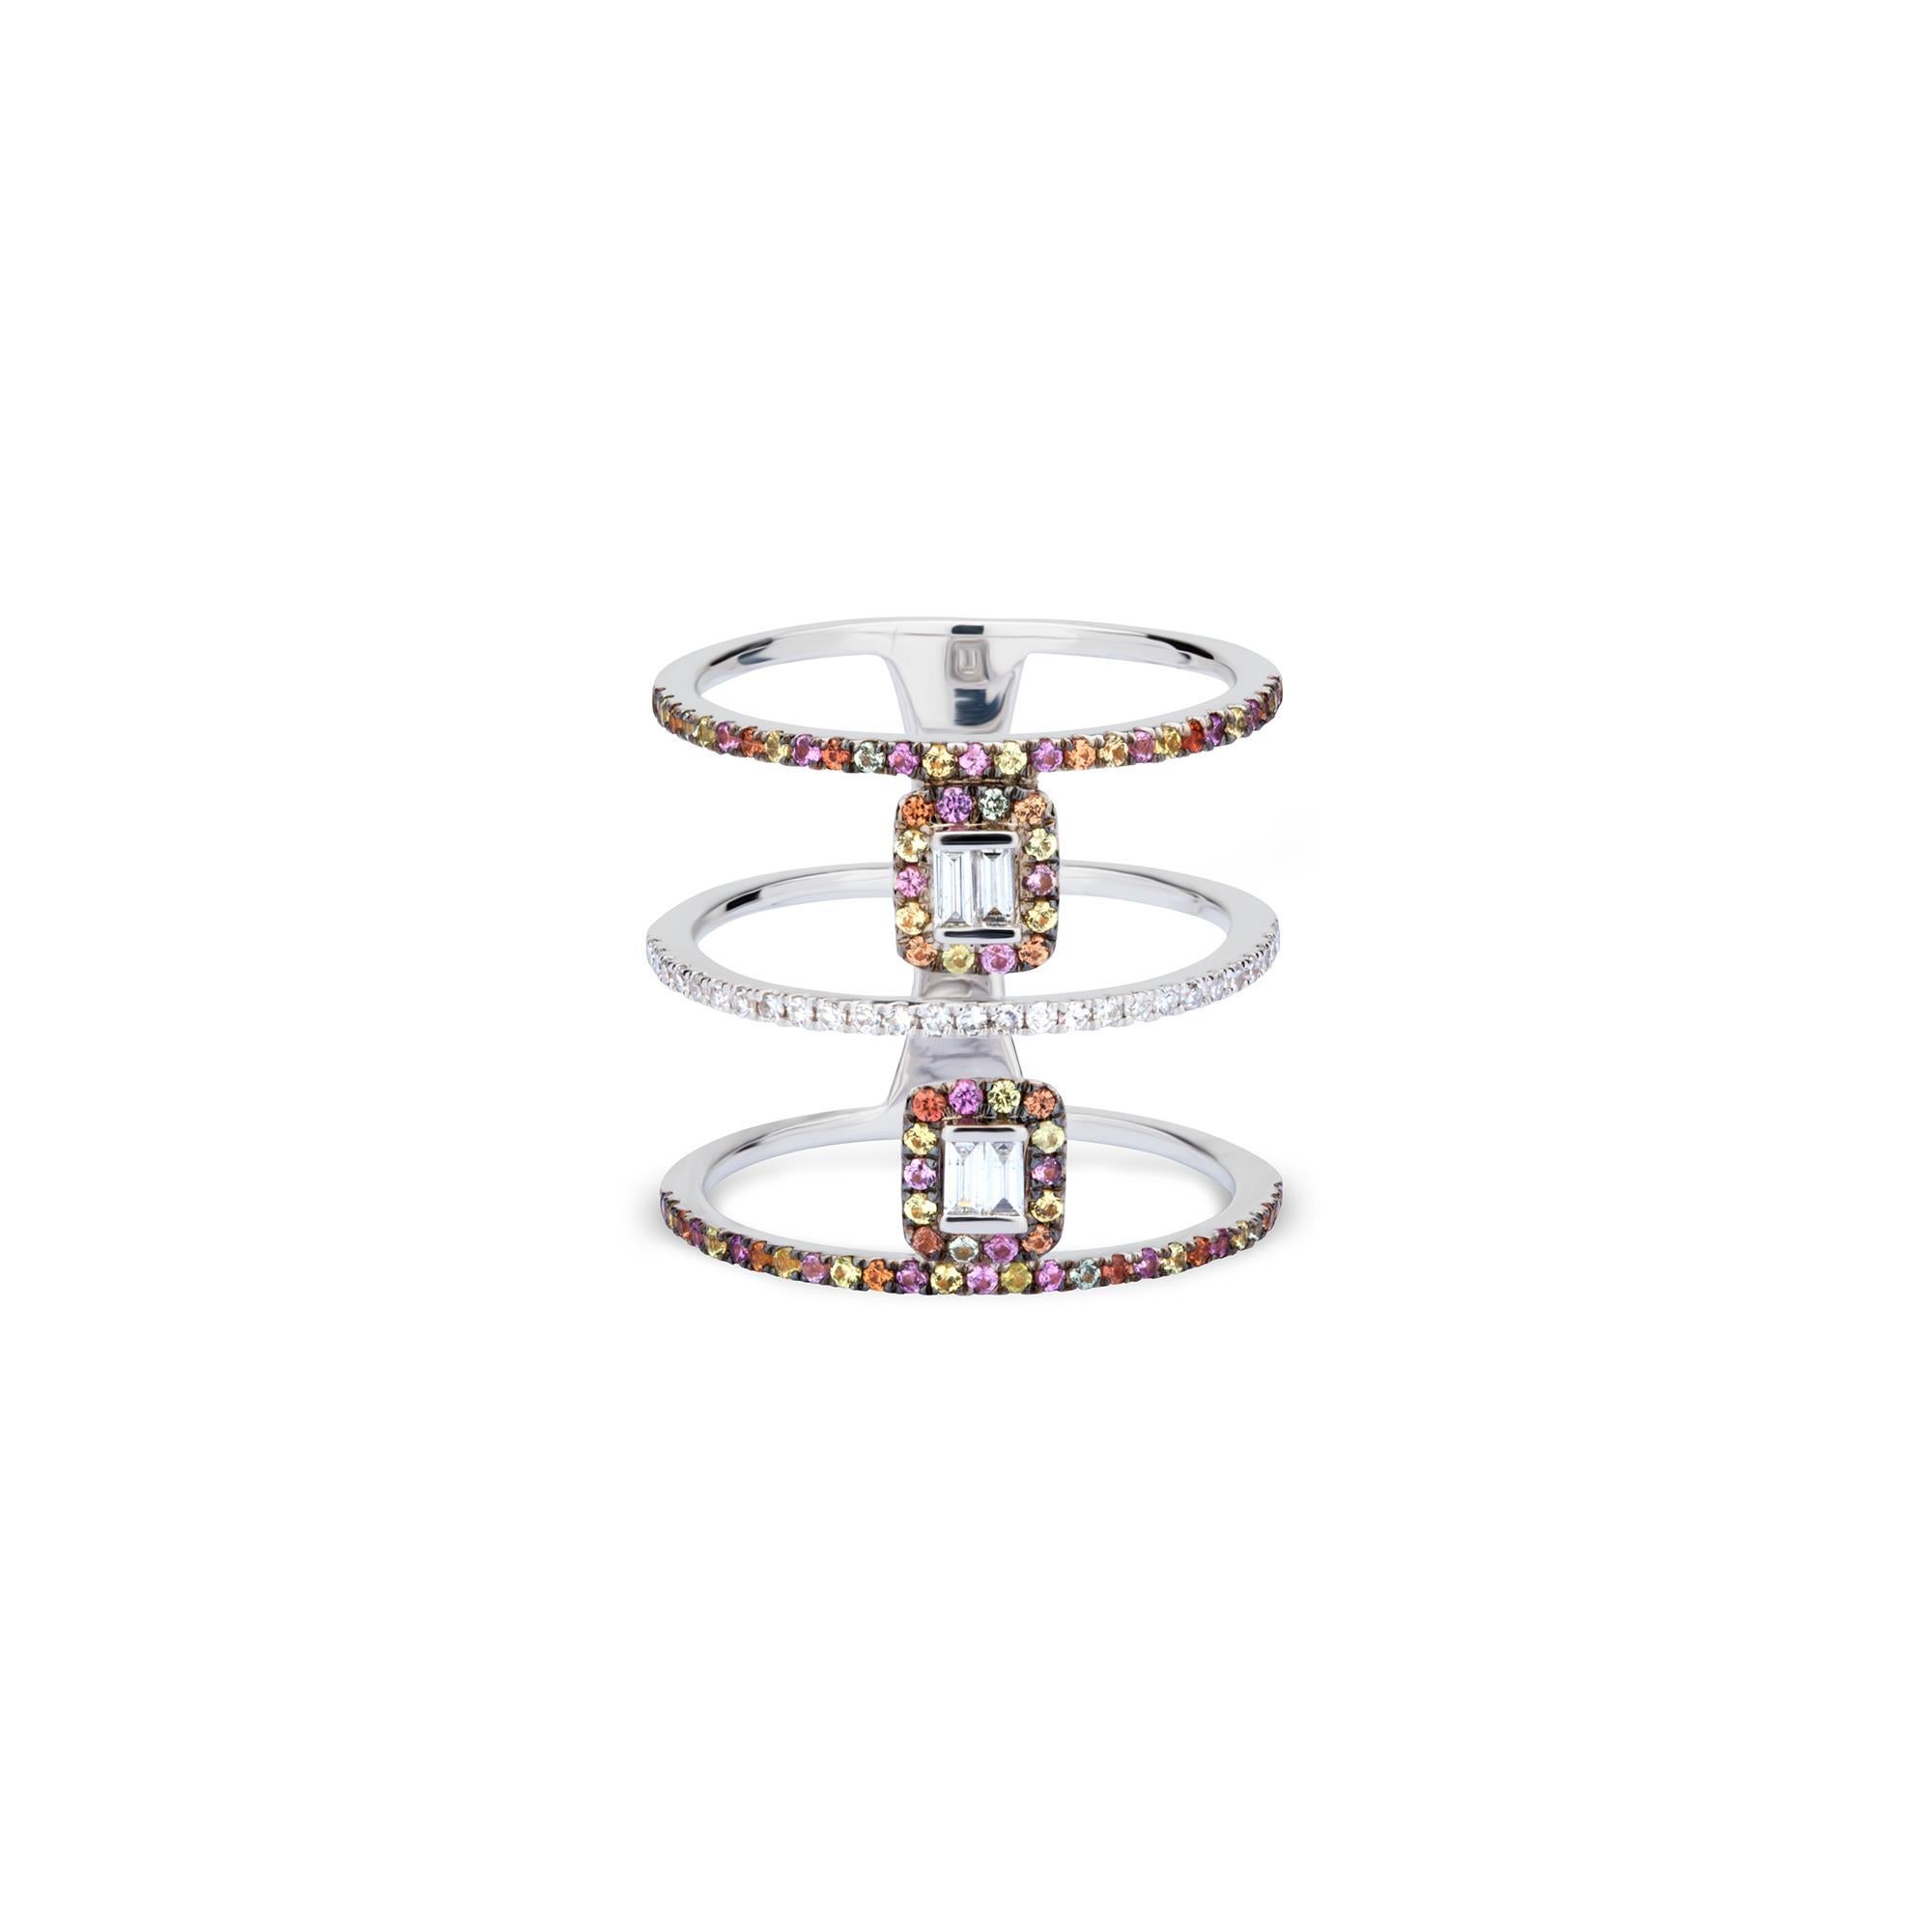 This Gemistry color feast multi-band ring set in 18k white gold features three bands. The central band studded with round diamonds is flanked by multi-sapphire studded bands on either side. Diamond baguettes in multi-sapphire halos enhance its